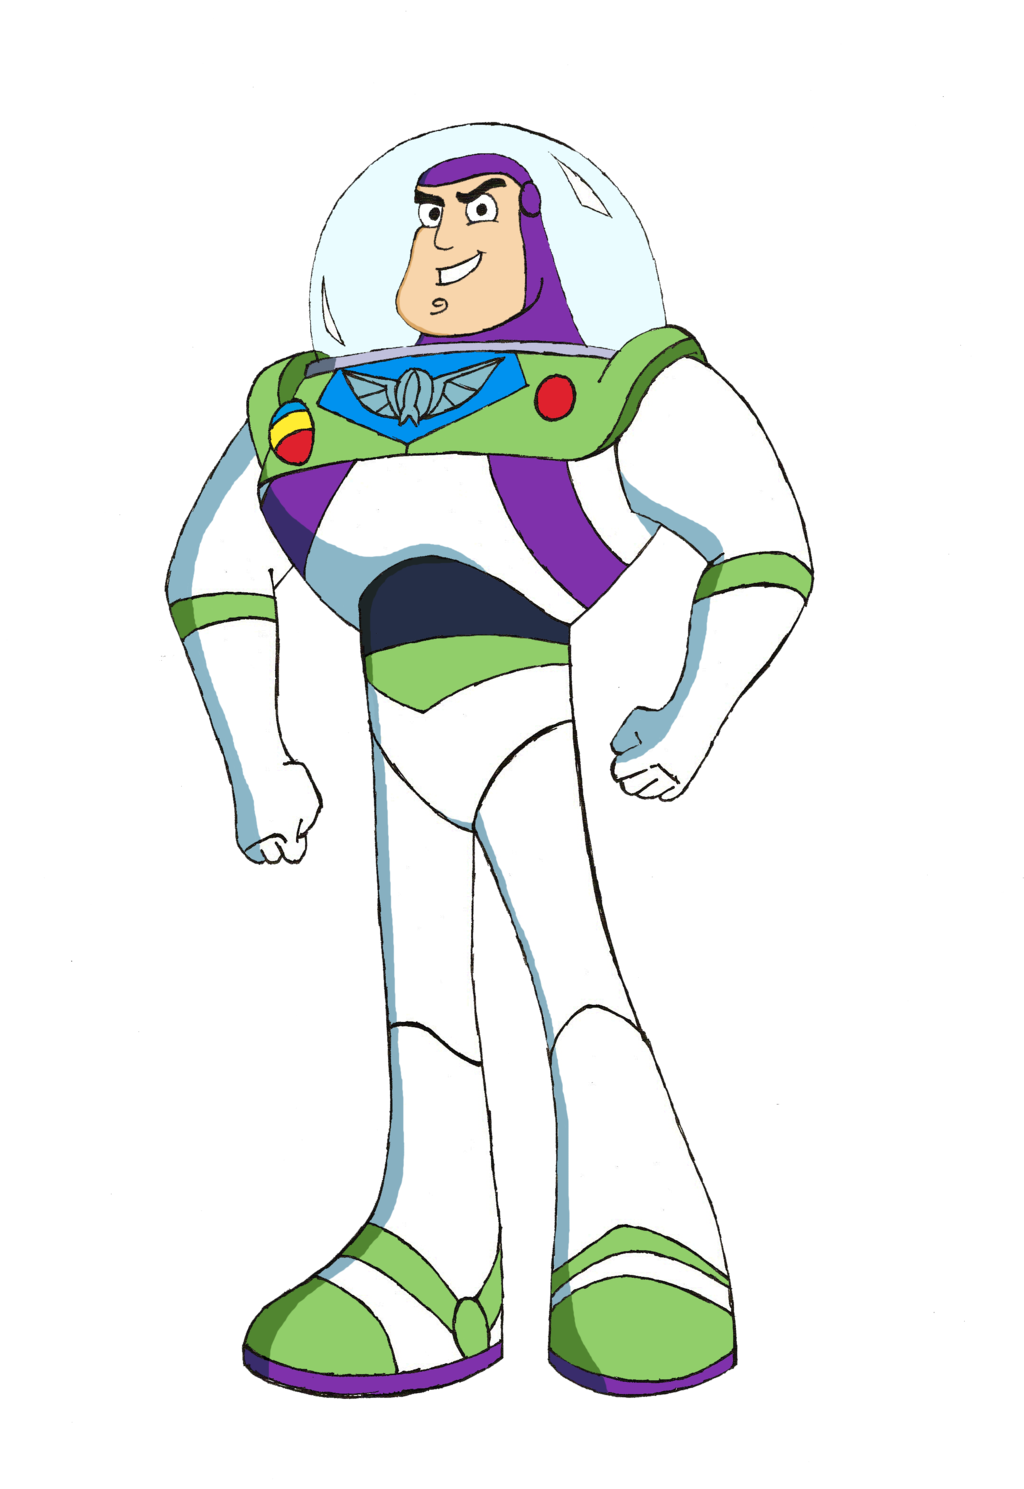 Buzz luzyear PNG pic